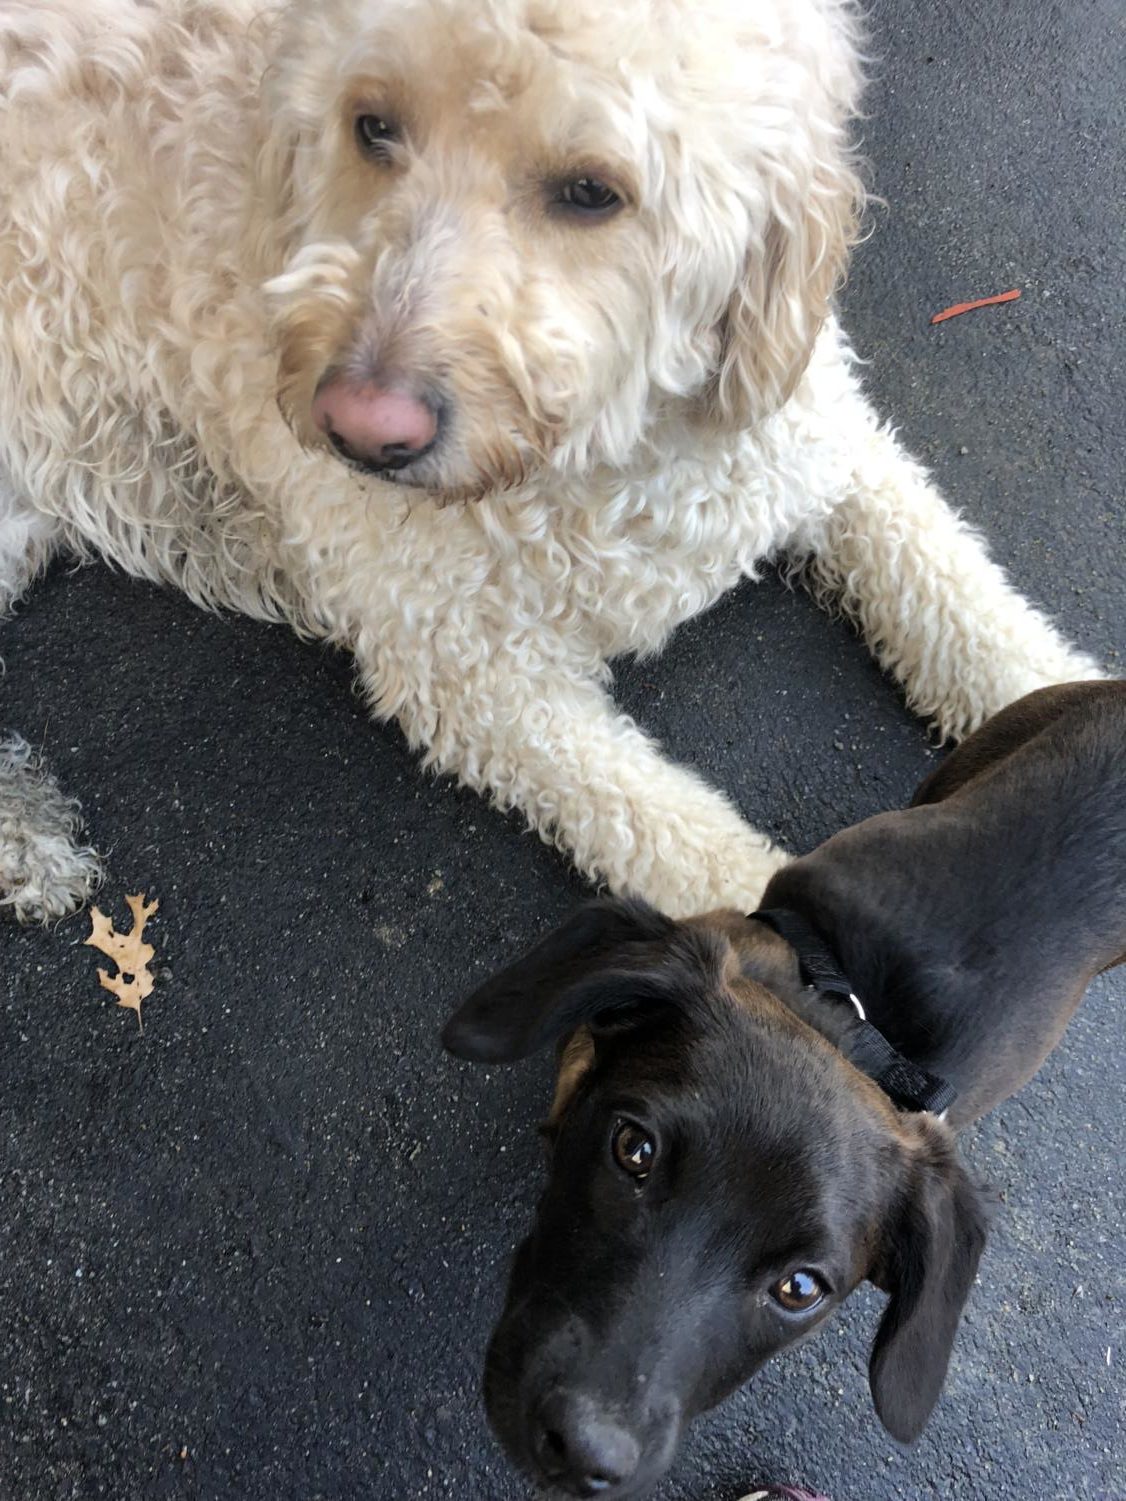 They are BEST friends. They love long walks and chasing each other in the yard. Finn also loves swimming, but he hasn’t converted Zoey yet. She is firmly a land-based cutie (and part-time Easter bunny).